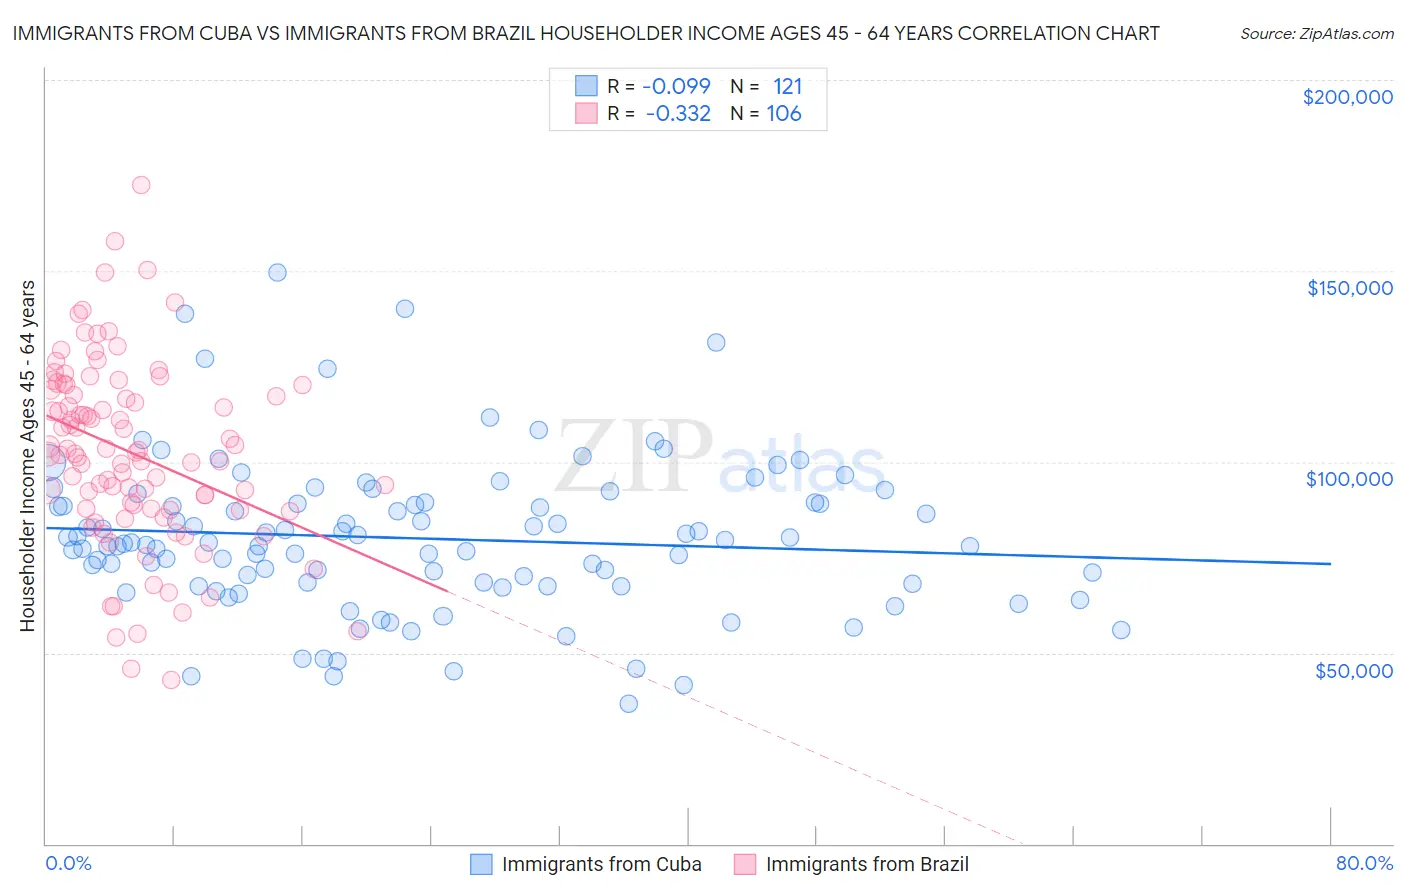 Immigrants from Cuba vs Immigrants from Brazil Householder Income Ages 45 - 64 years